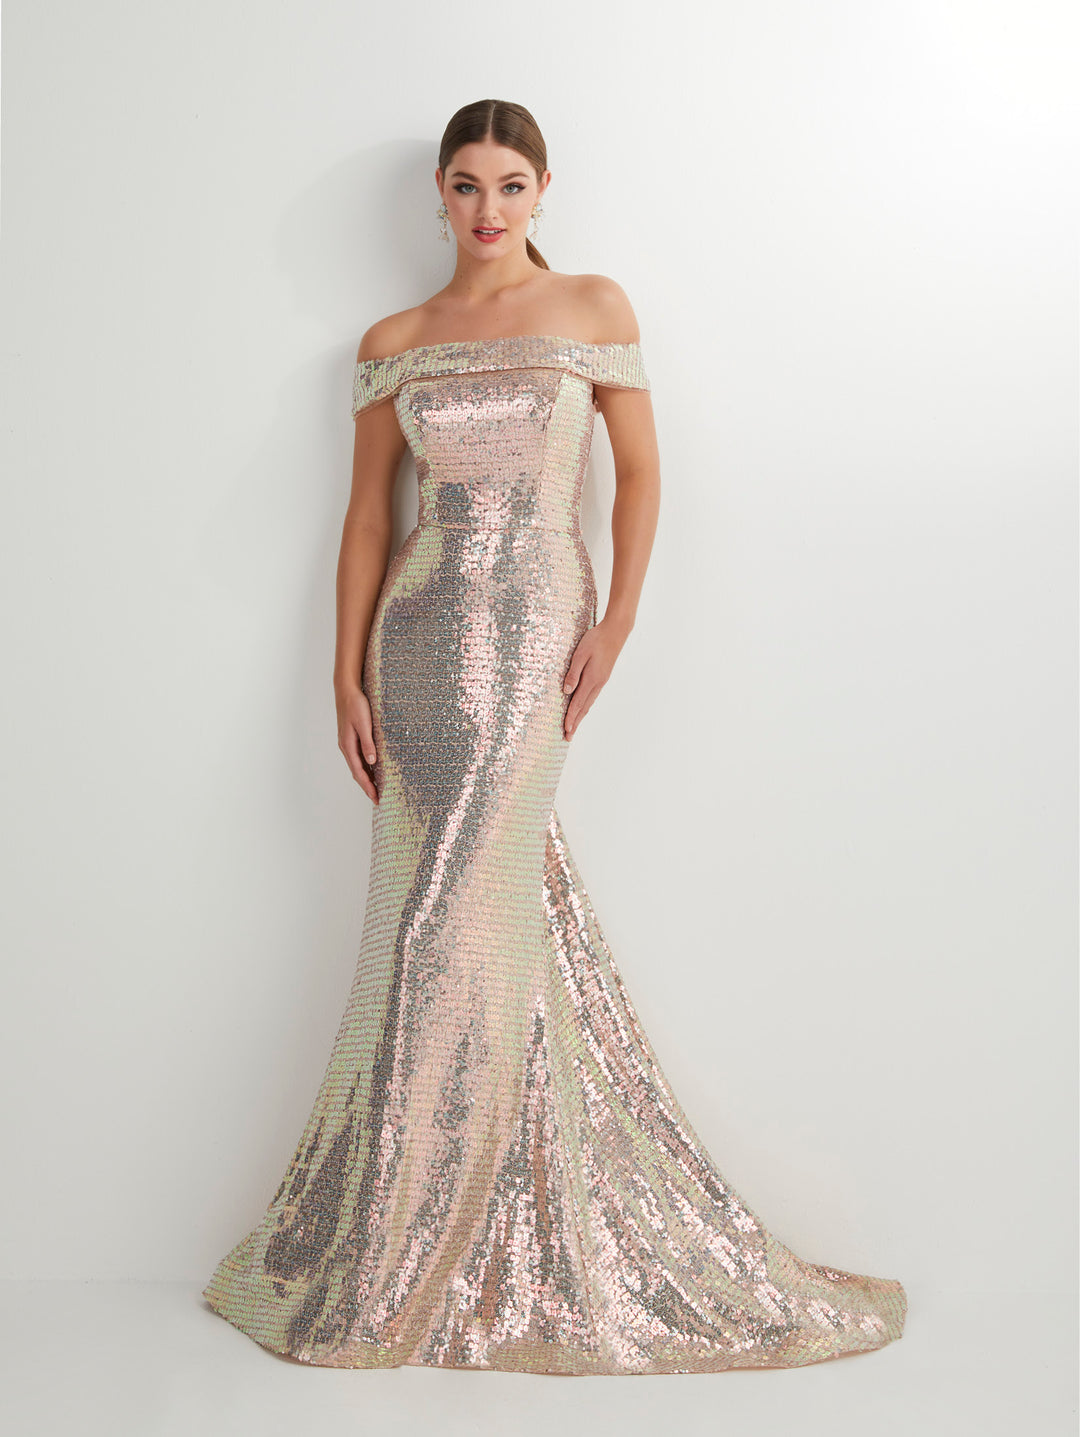 Fitted Long Off Shoulder Sequin Dress by Studio 17 12911